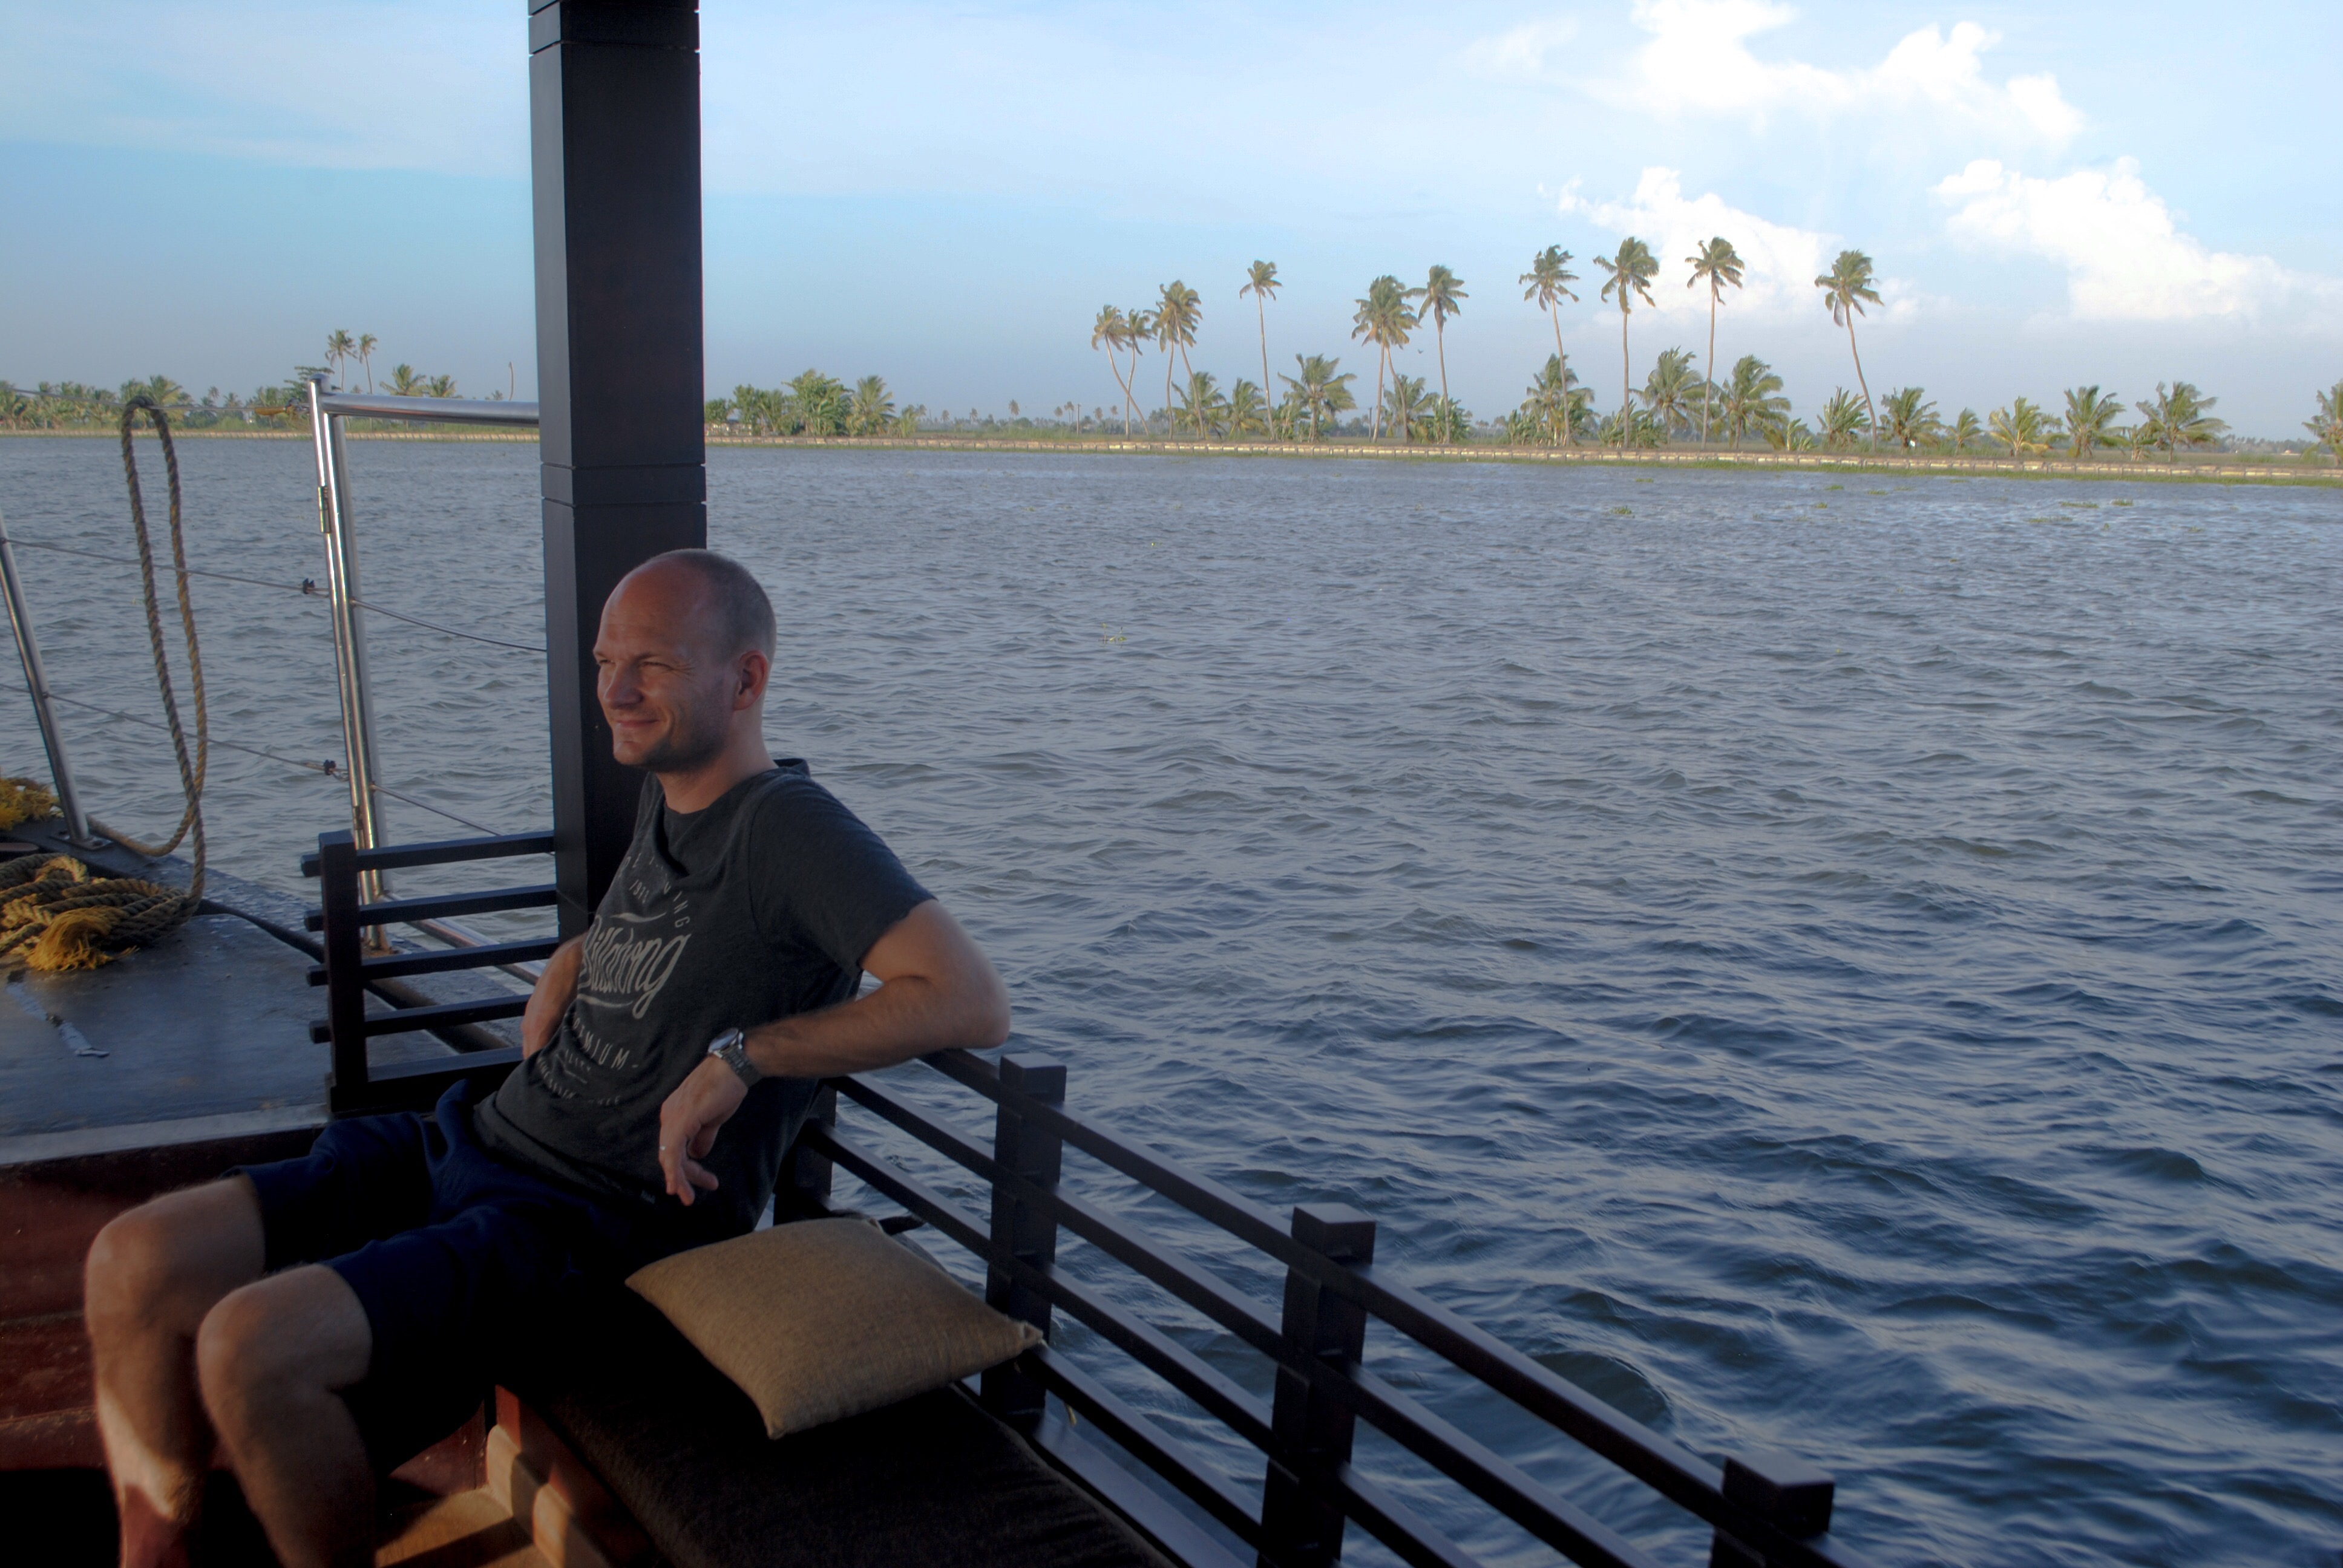 Luxury Houseboats on the Alleppey Backwaters﻿